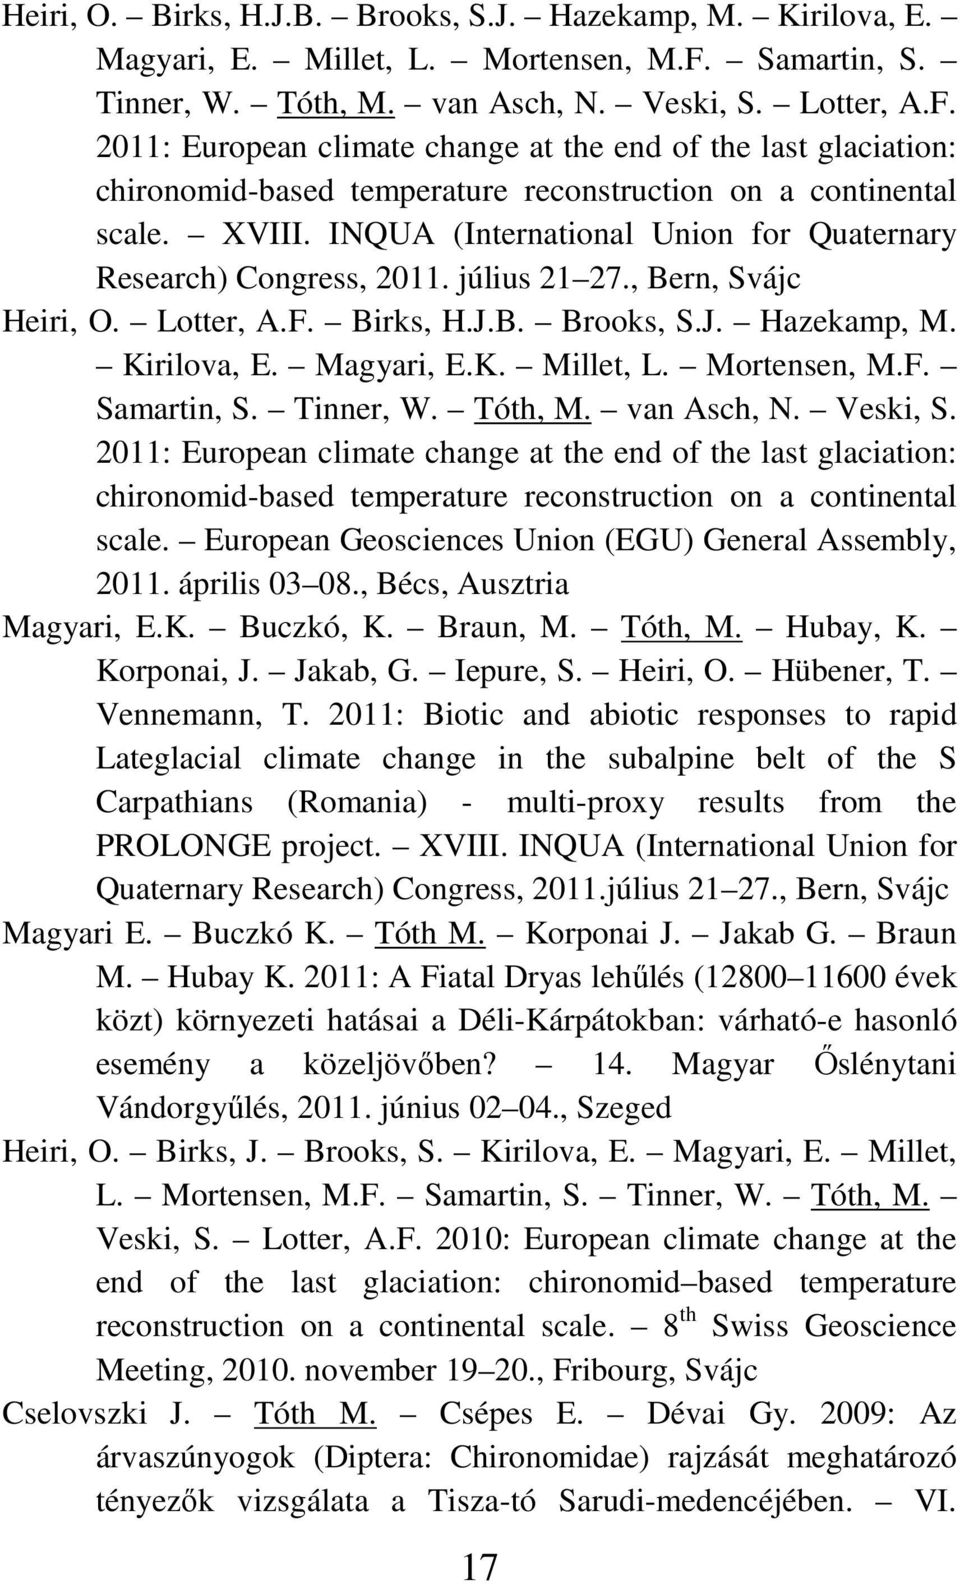 2011: European climate change at the end of the last glaciation: chironomid-based temperature reconstruction on a continental scale. XVIII.